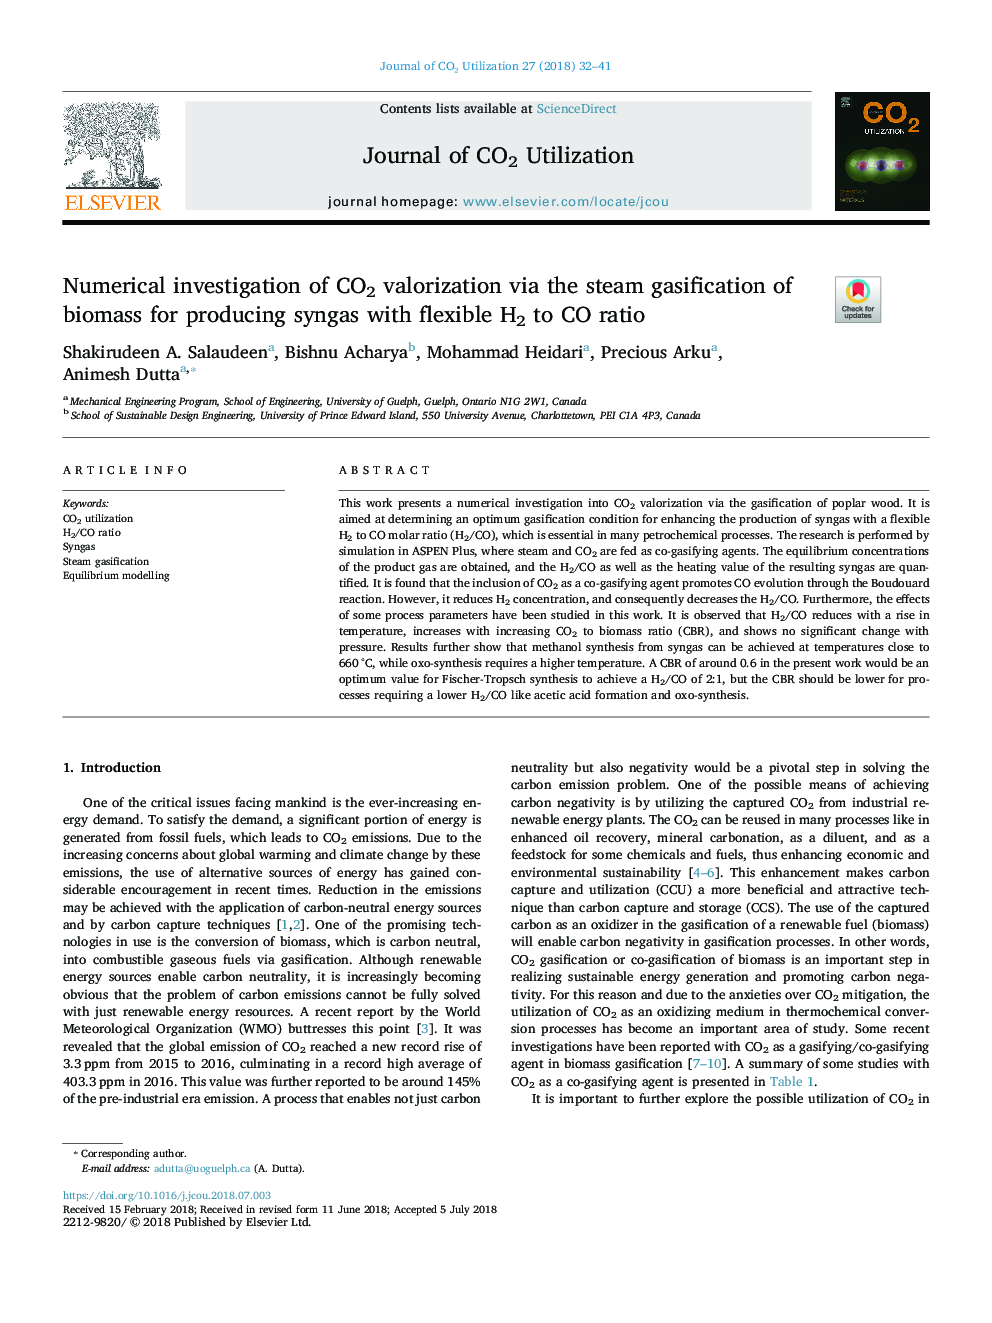 Numerical investigation of CO2 valorization via the steam gasification of biomass for producing syngas with flexible H2 to CO ratio